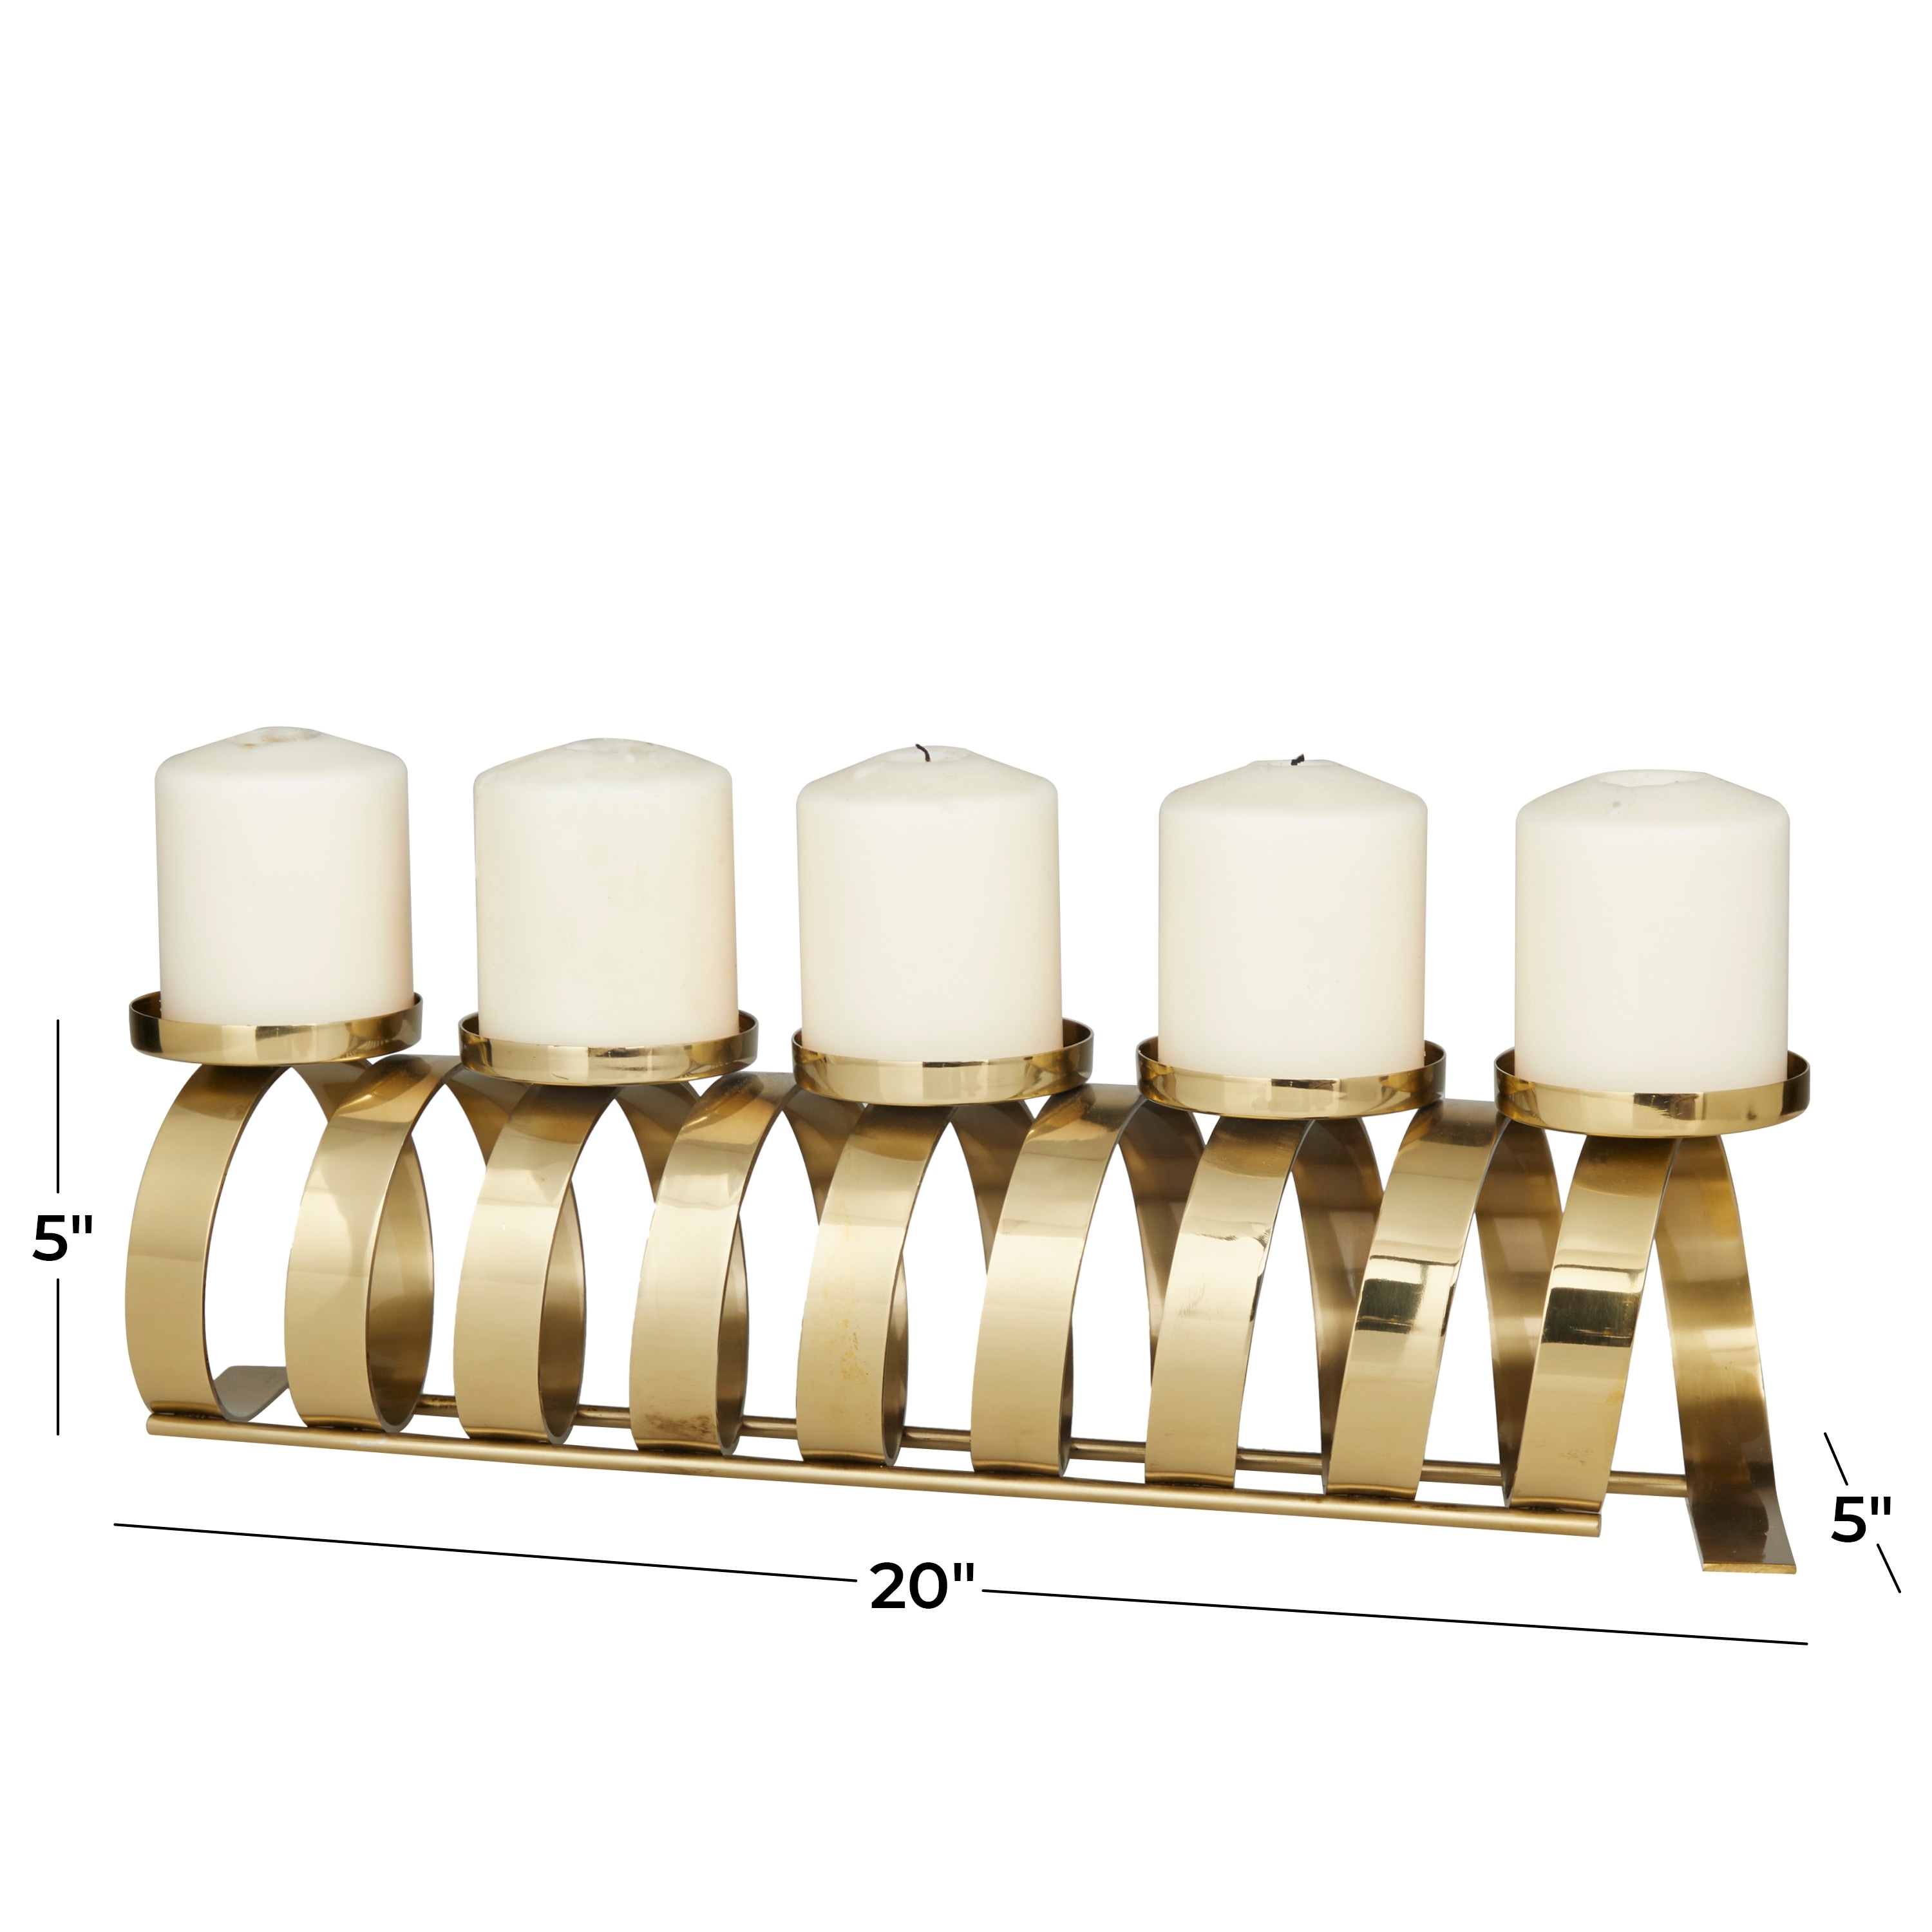 Gold Stainless Steel Contemporary Candle Holder - 20"L x 5"W x 5"H